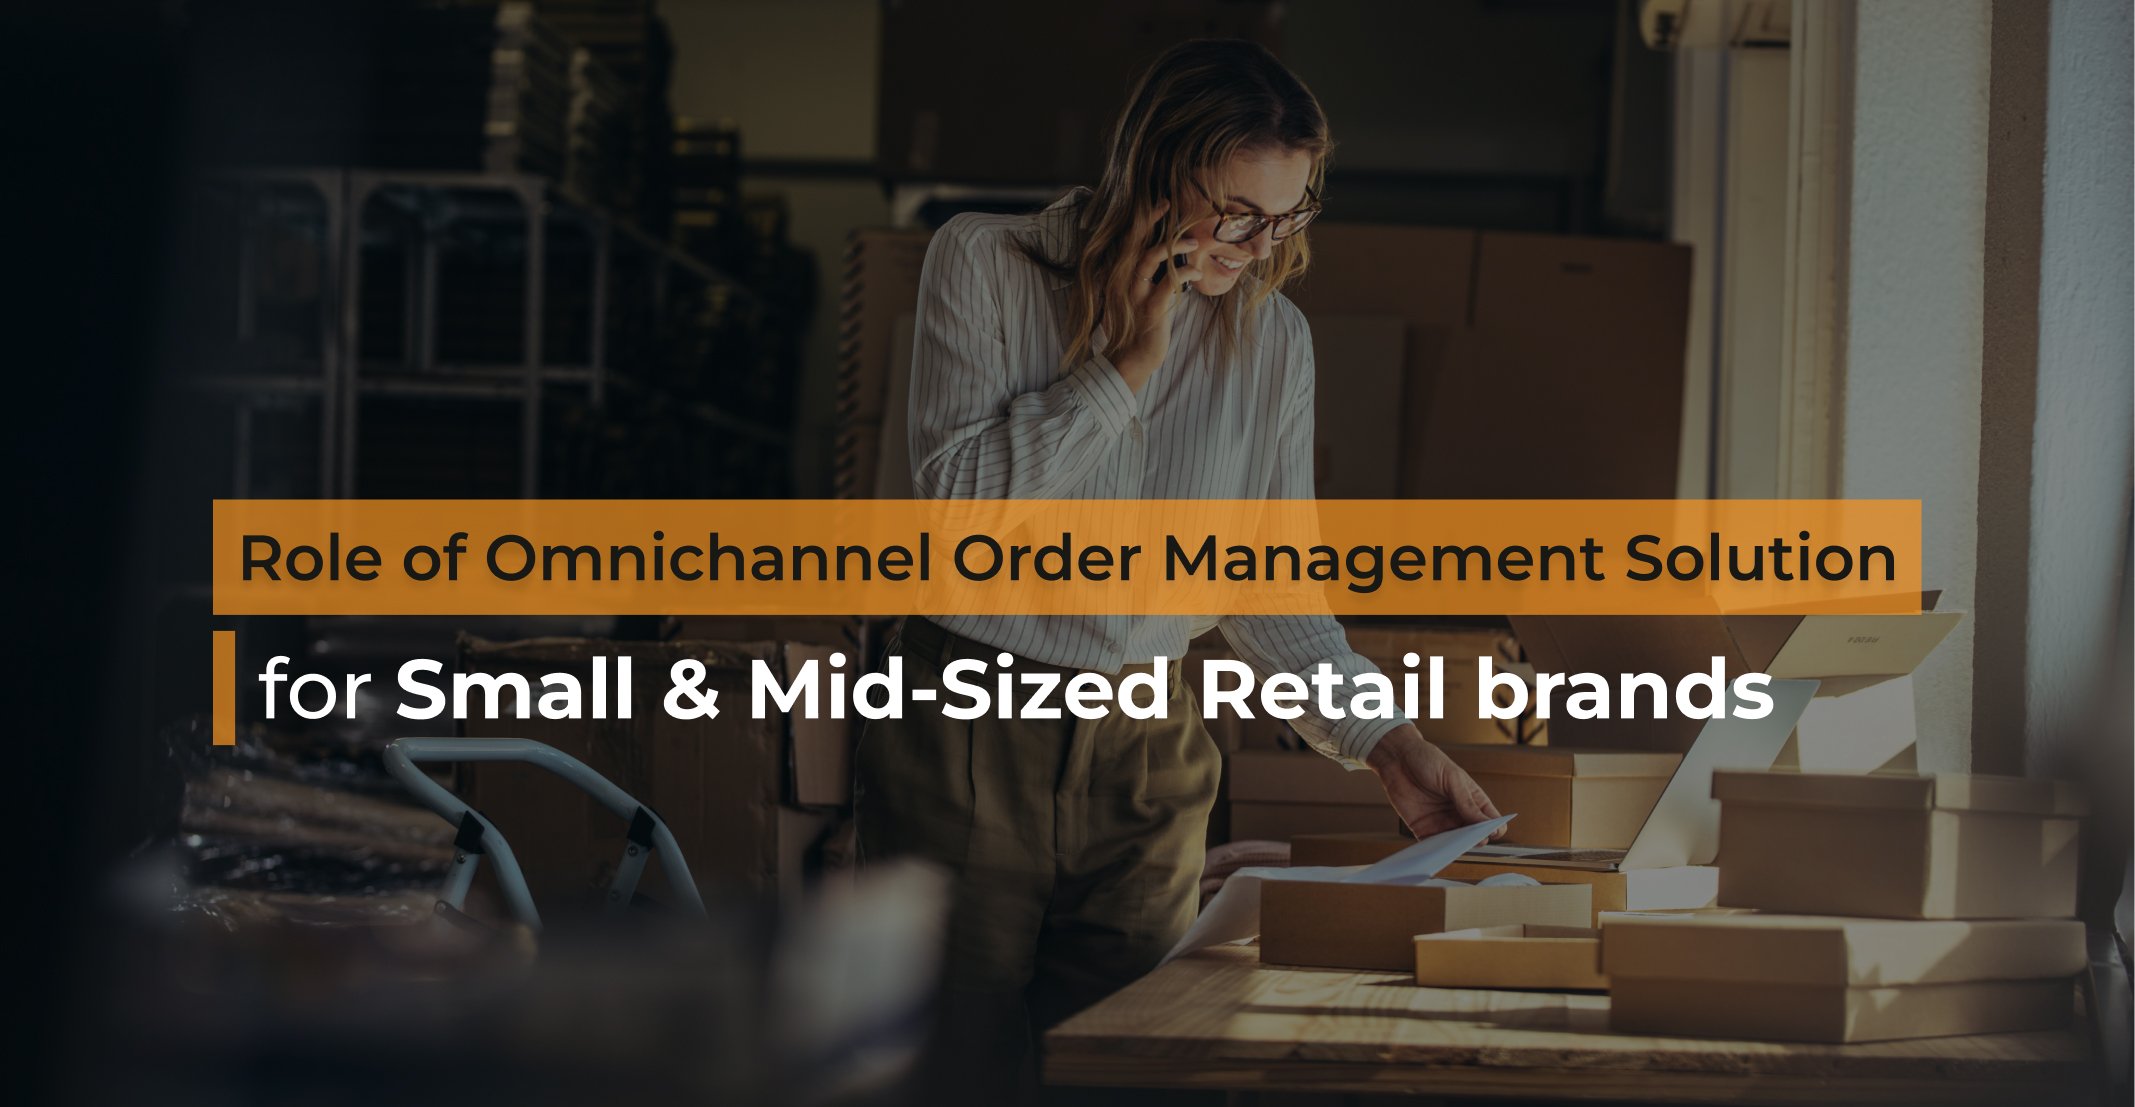 Role of Omnichannel Order Management Solution for Small & Mid-Sized Retail Brands